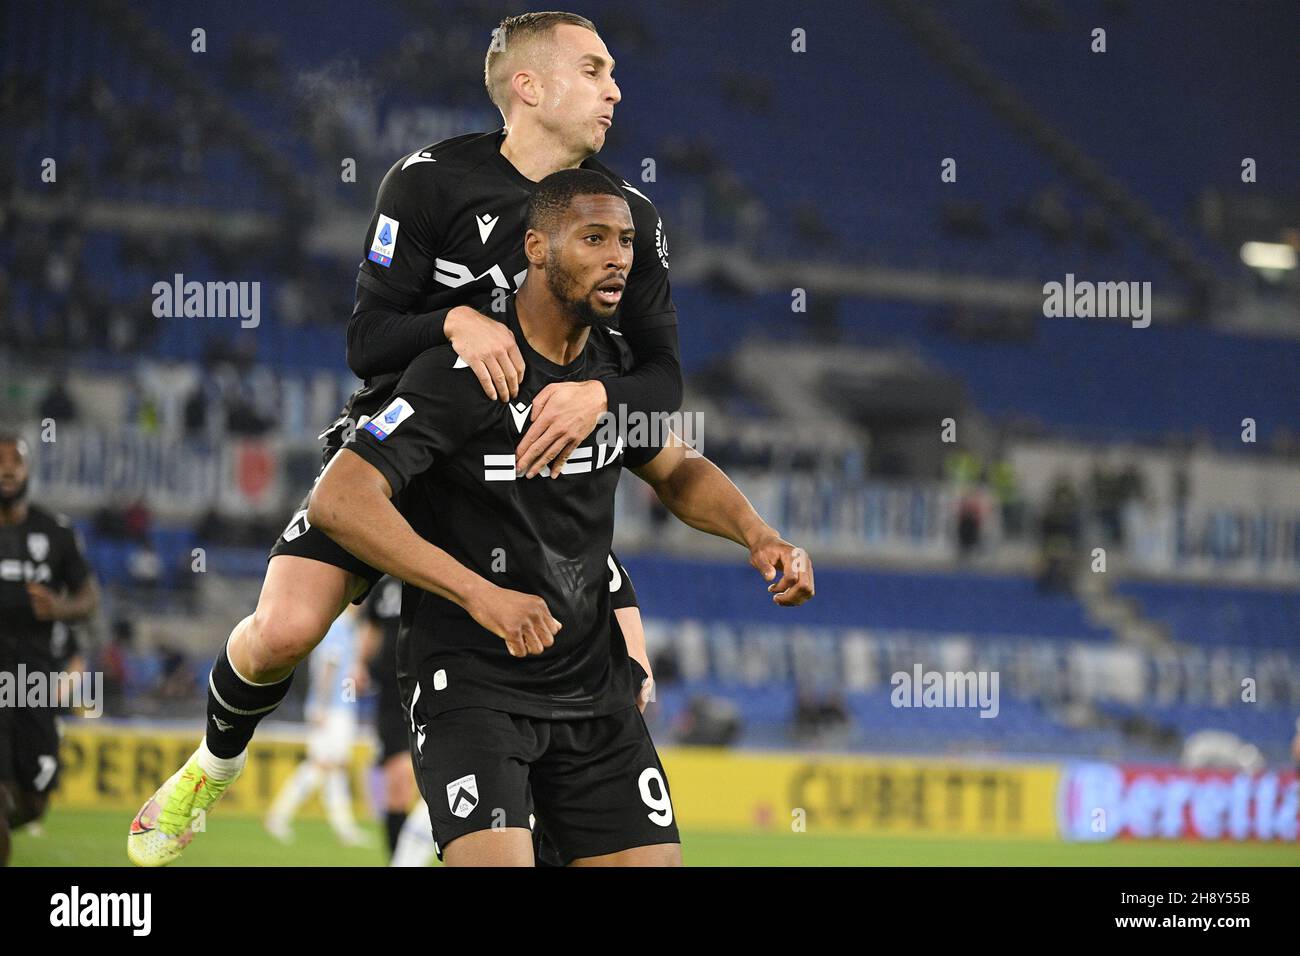 Rome, Italy. 2 December 2021, Norberto Bercique Gomes Betuncal (Udinese) celebrates after scoring the goal 0-1 during the  Italian Football Championship League A 2021/2022 match between SS Lazio vs Udinese Calcio at the Olimpic Stadium in Rome on 02 December 2021. Stock Photo